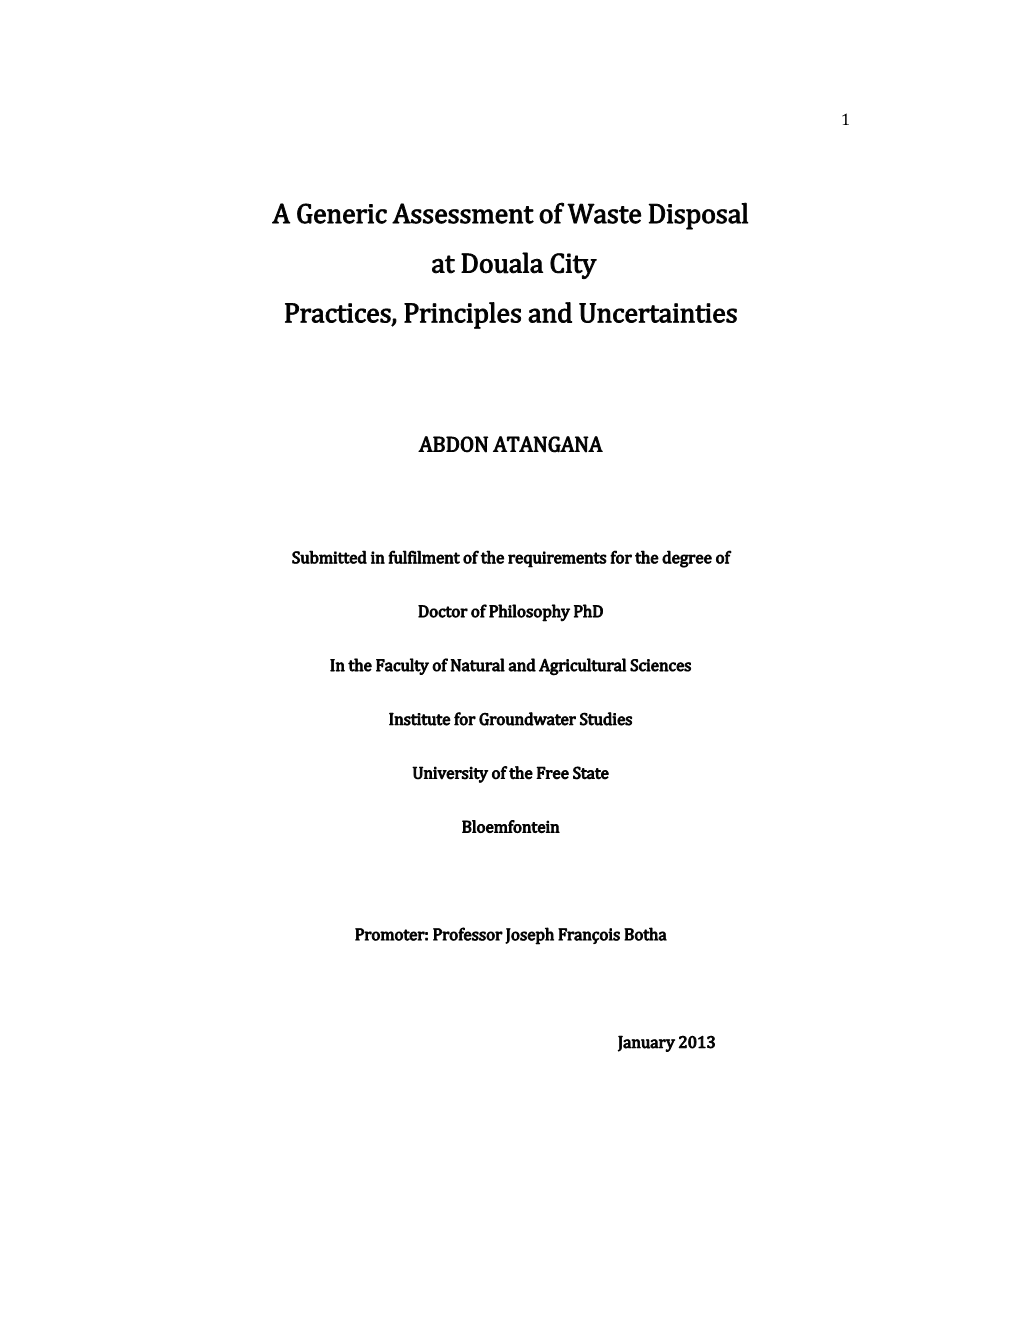 A Generic Assessment of Waste Disposal at Douala City Practices, Principles and Uncertainties